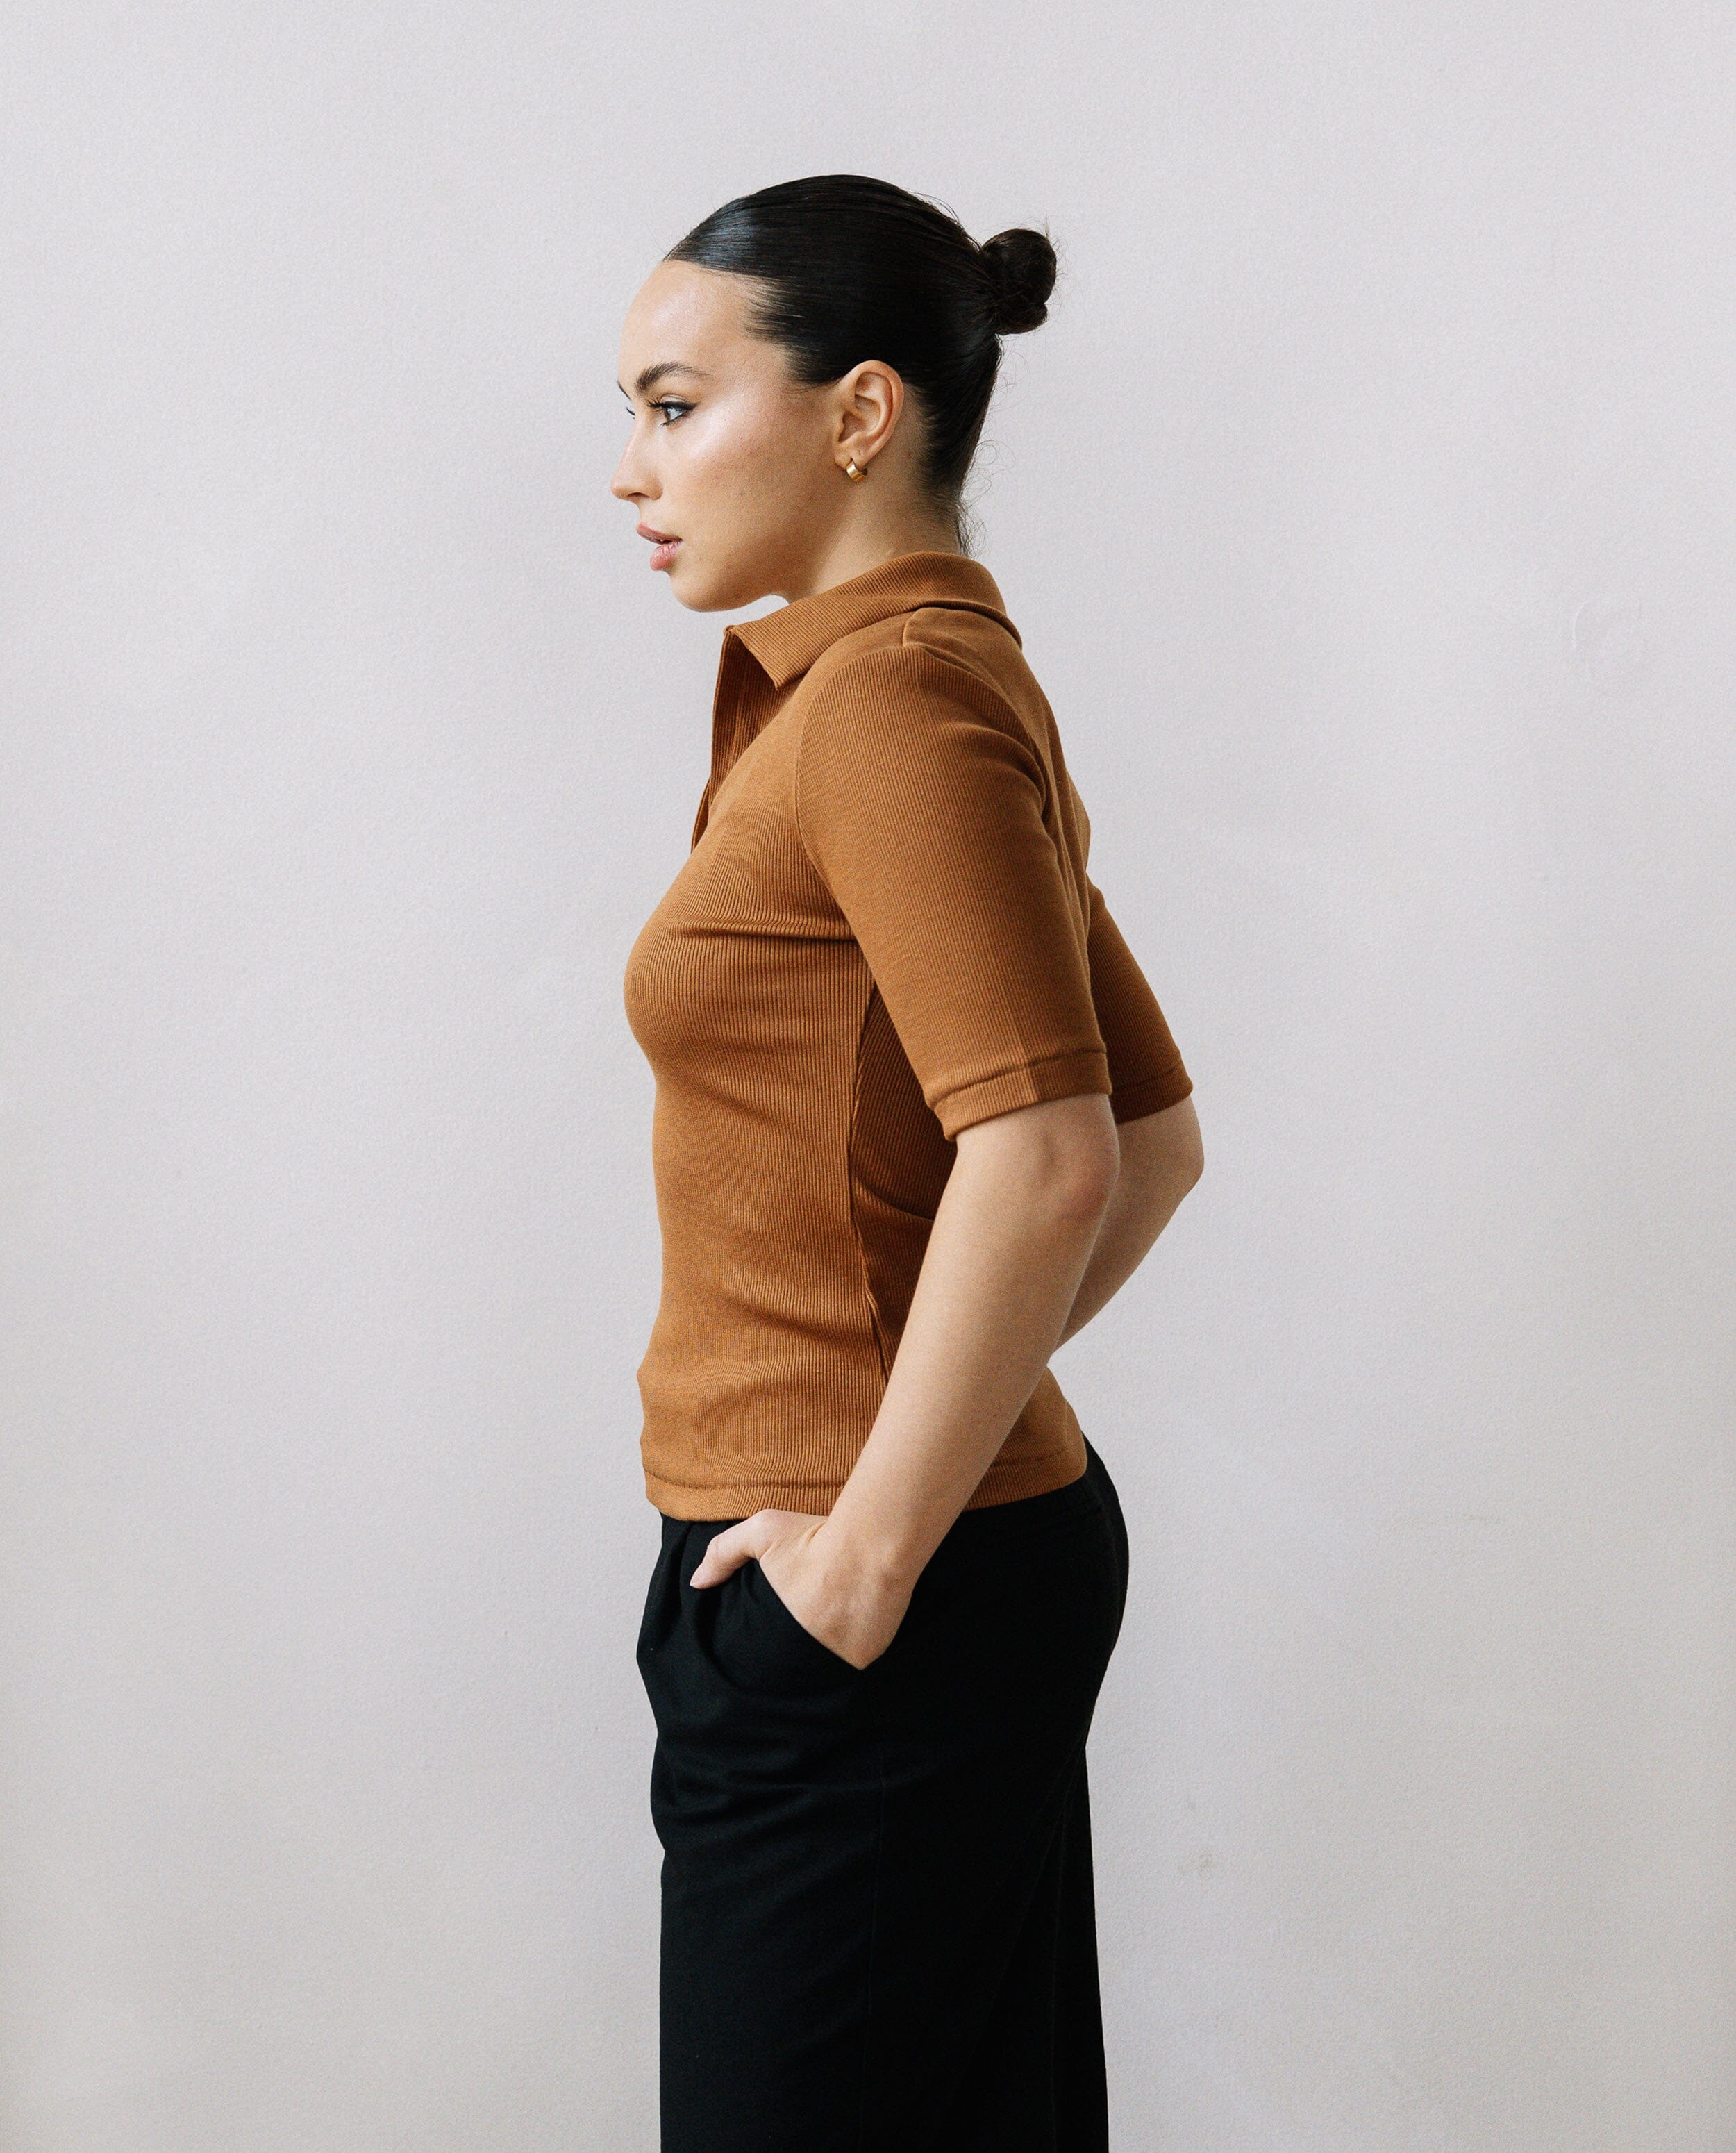 The Rib Polo Shirt in Copper | FRANC Sustainable Clothing